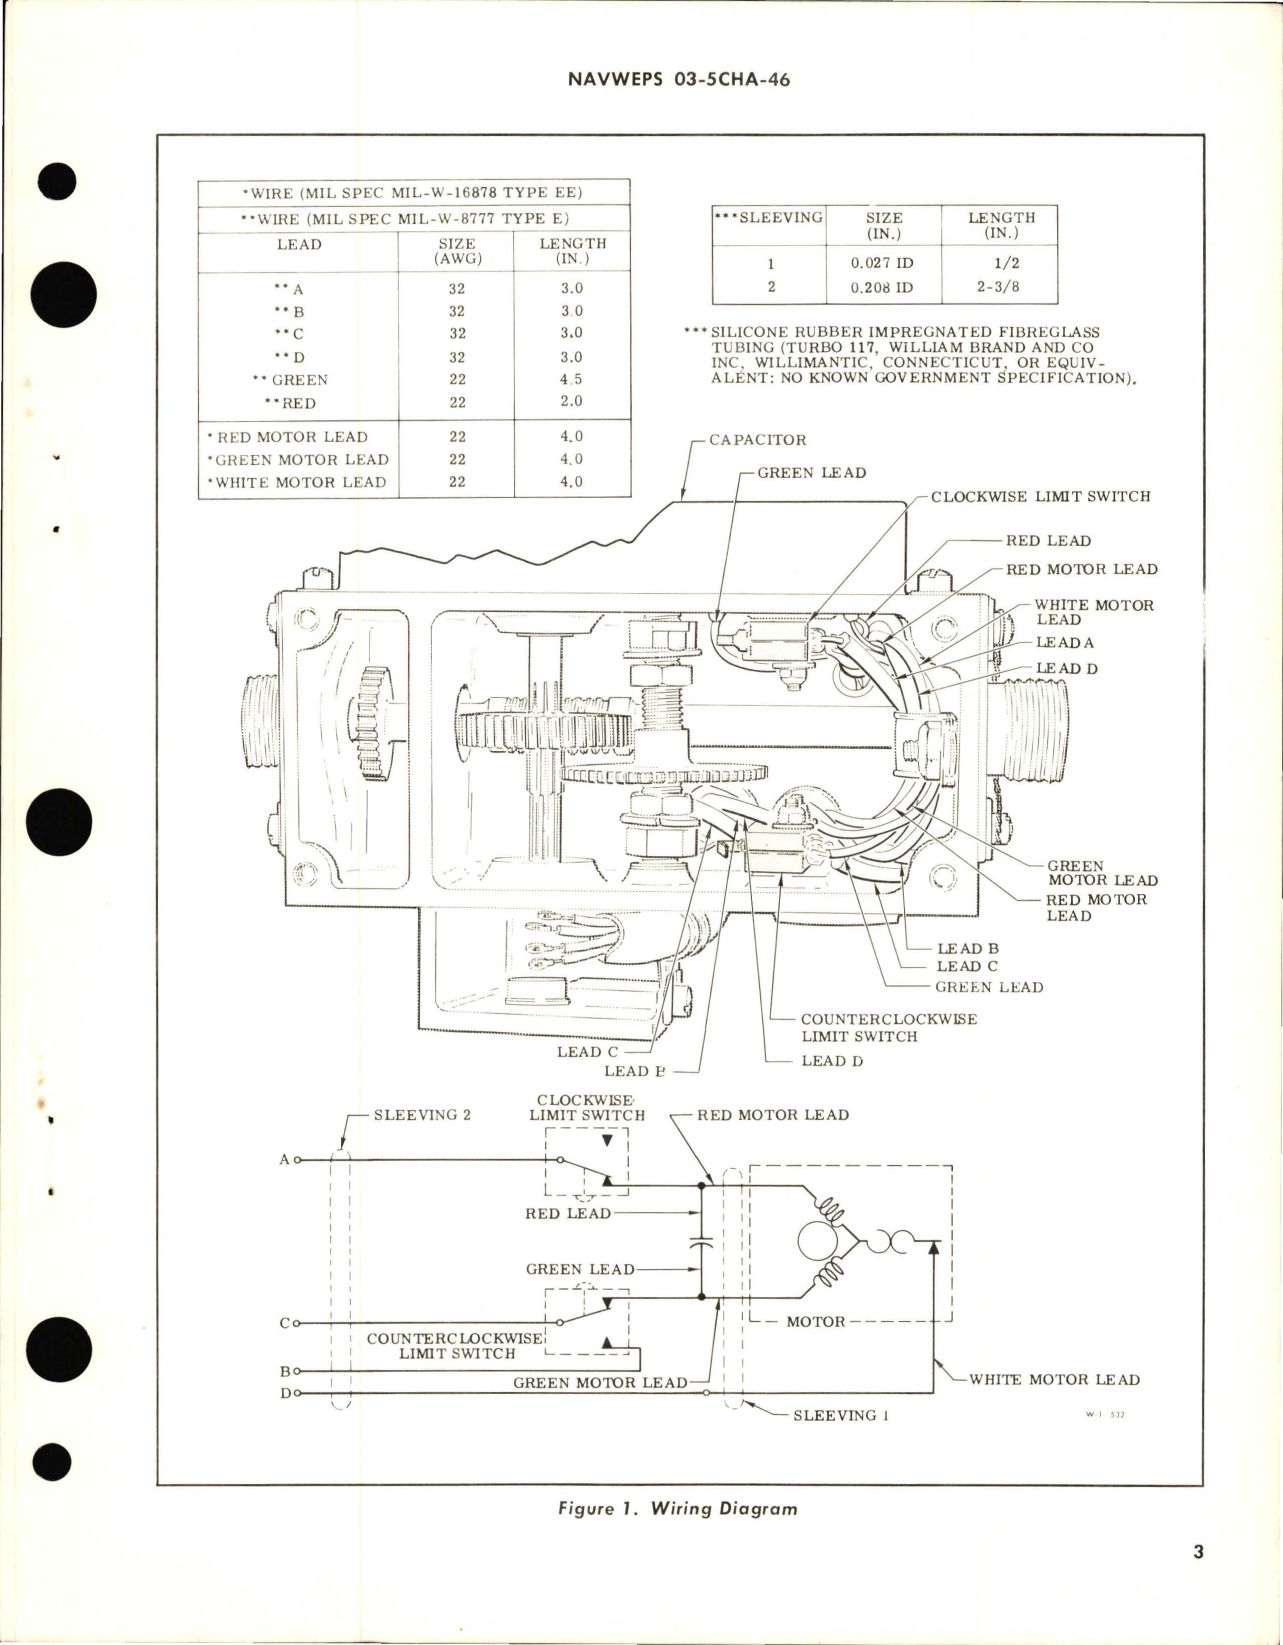 Sample page 5 from AirCorps Library document: Overhaul Instructions with Parts Breakdown for Electromechanical Rotary Actuator and Aircraft Alternating Current Motor